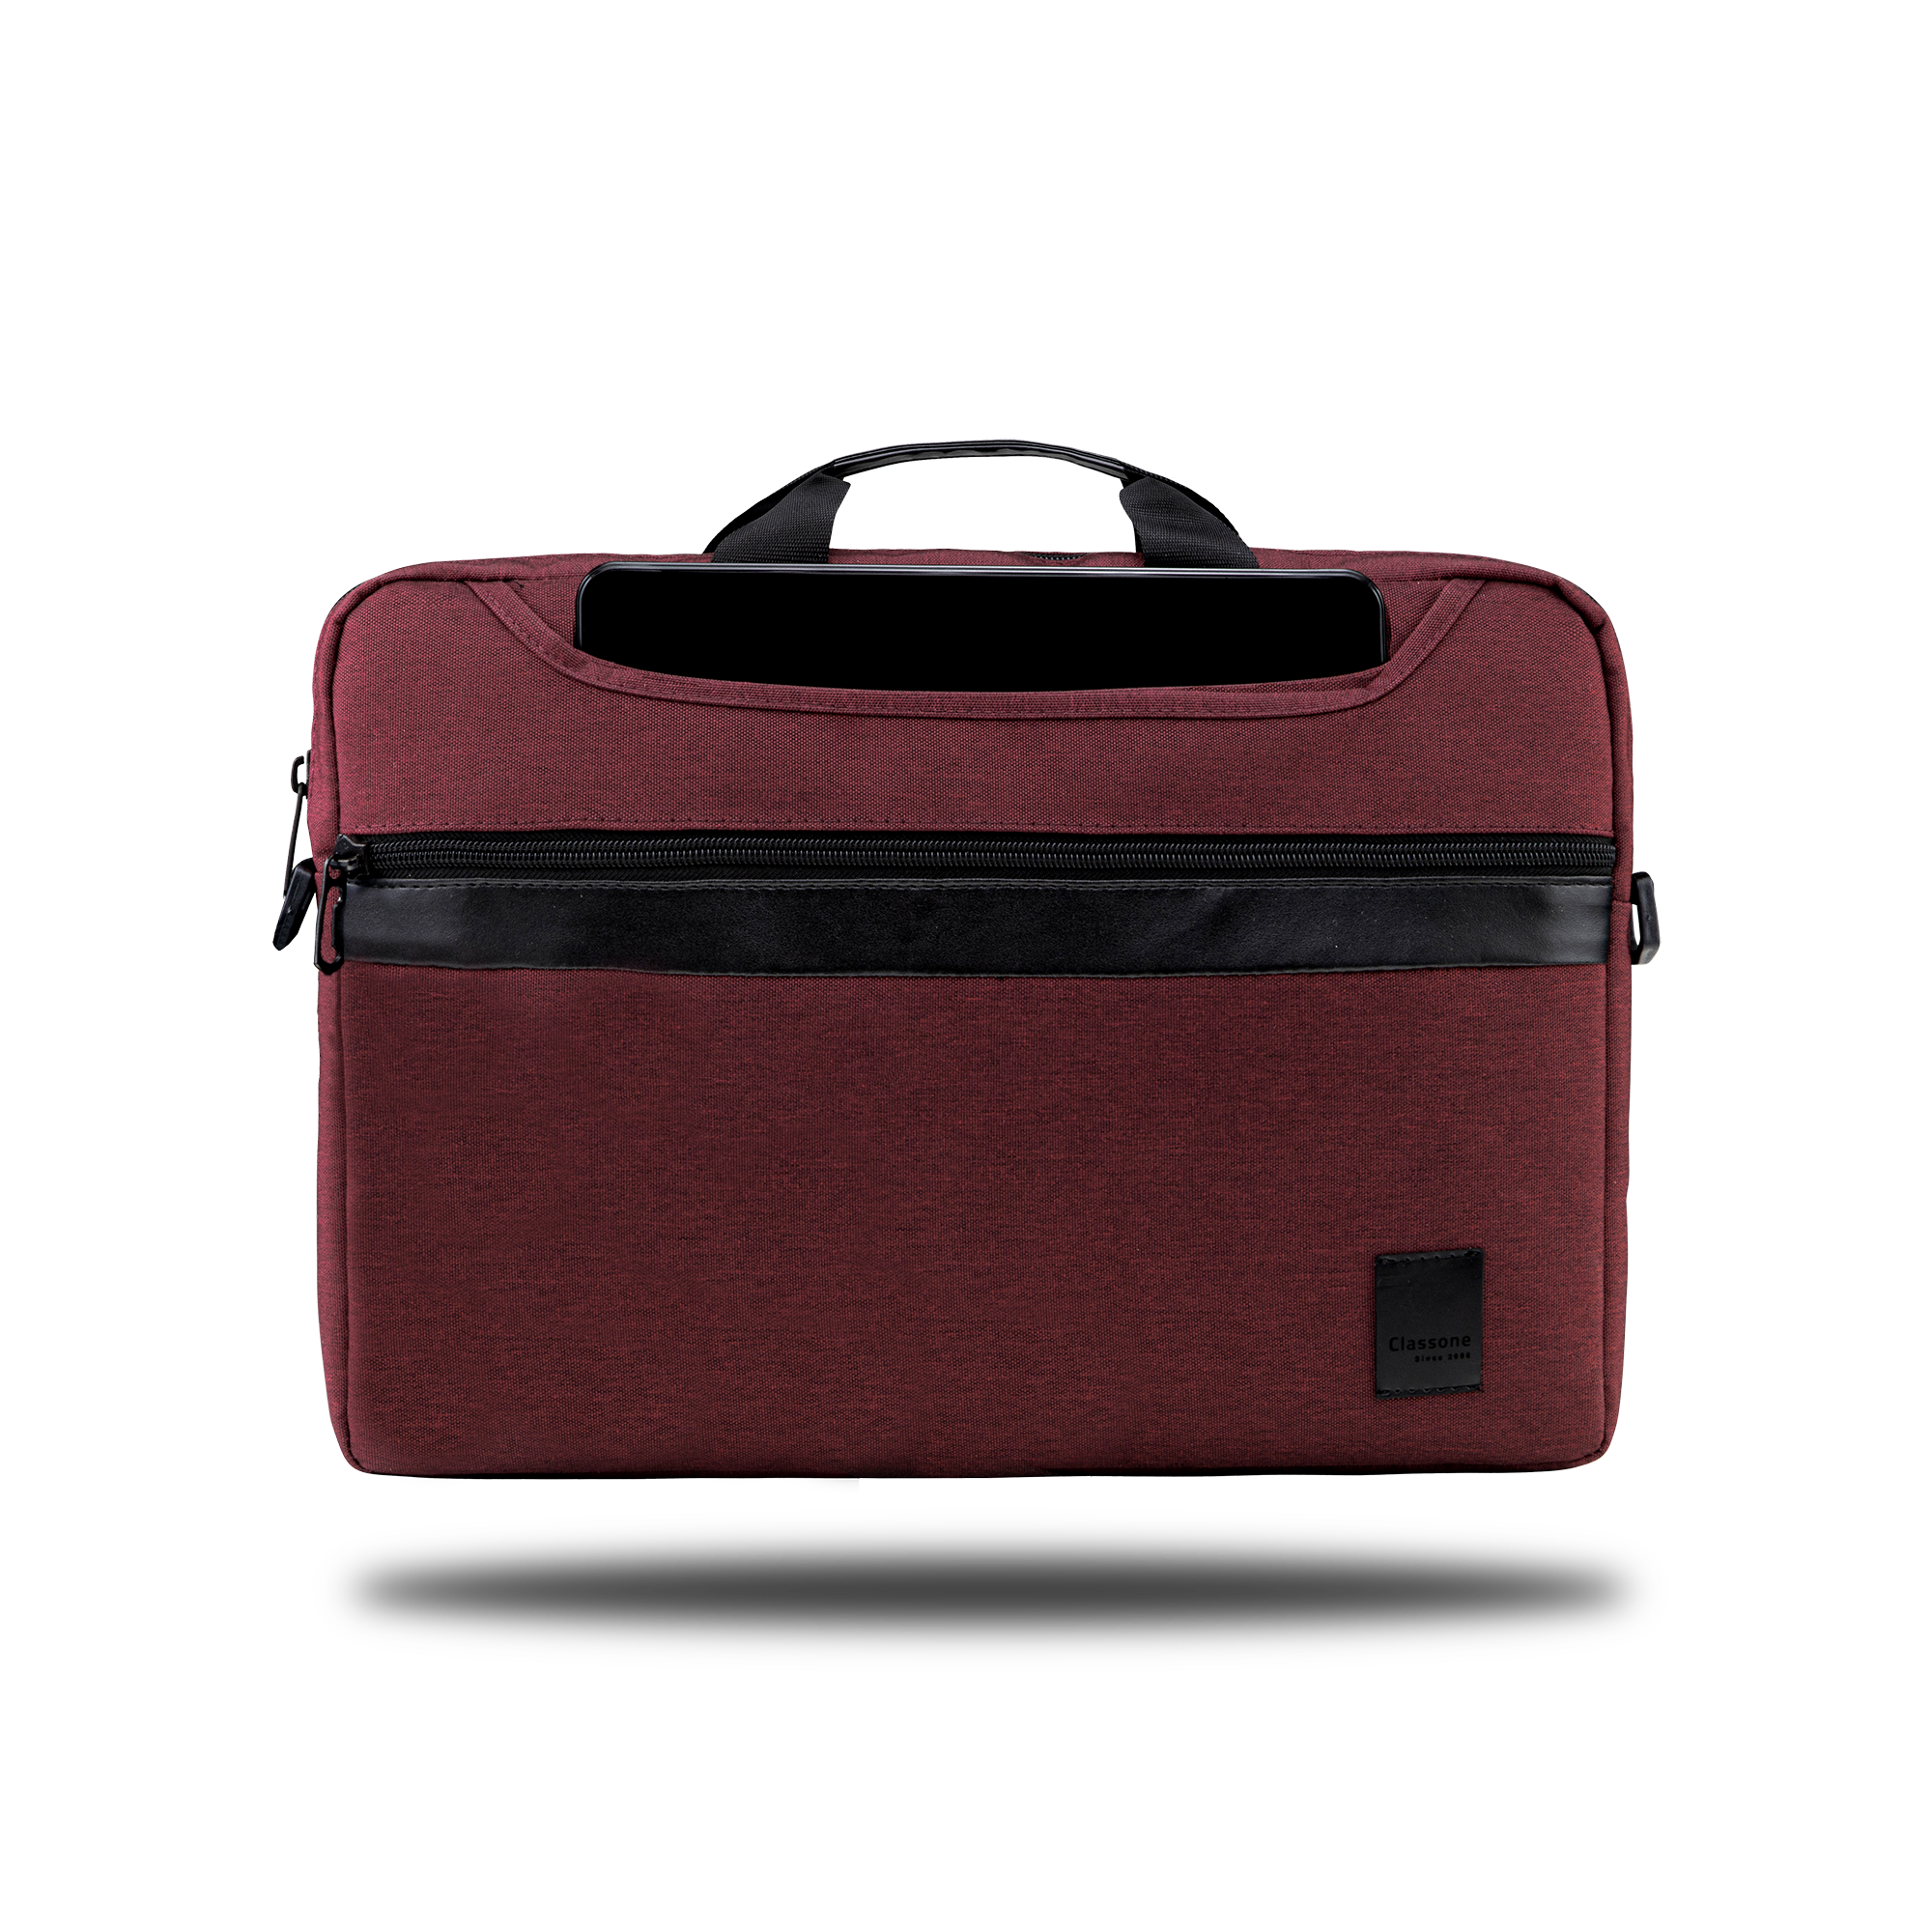 Classone WorkStation3 Series BND605 WTXpro Waterproof Fabric 15.6 '' Laptop Bag-Claret Red